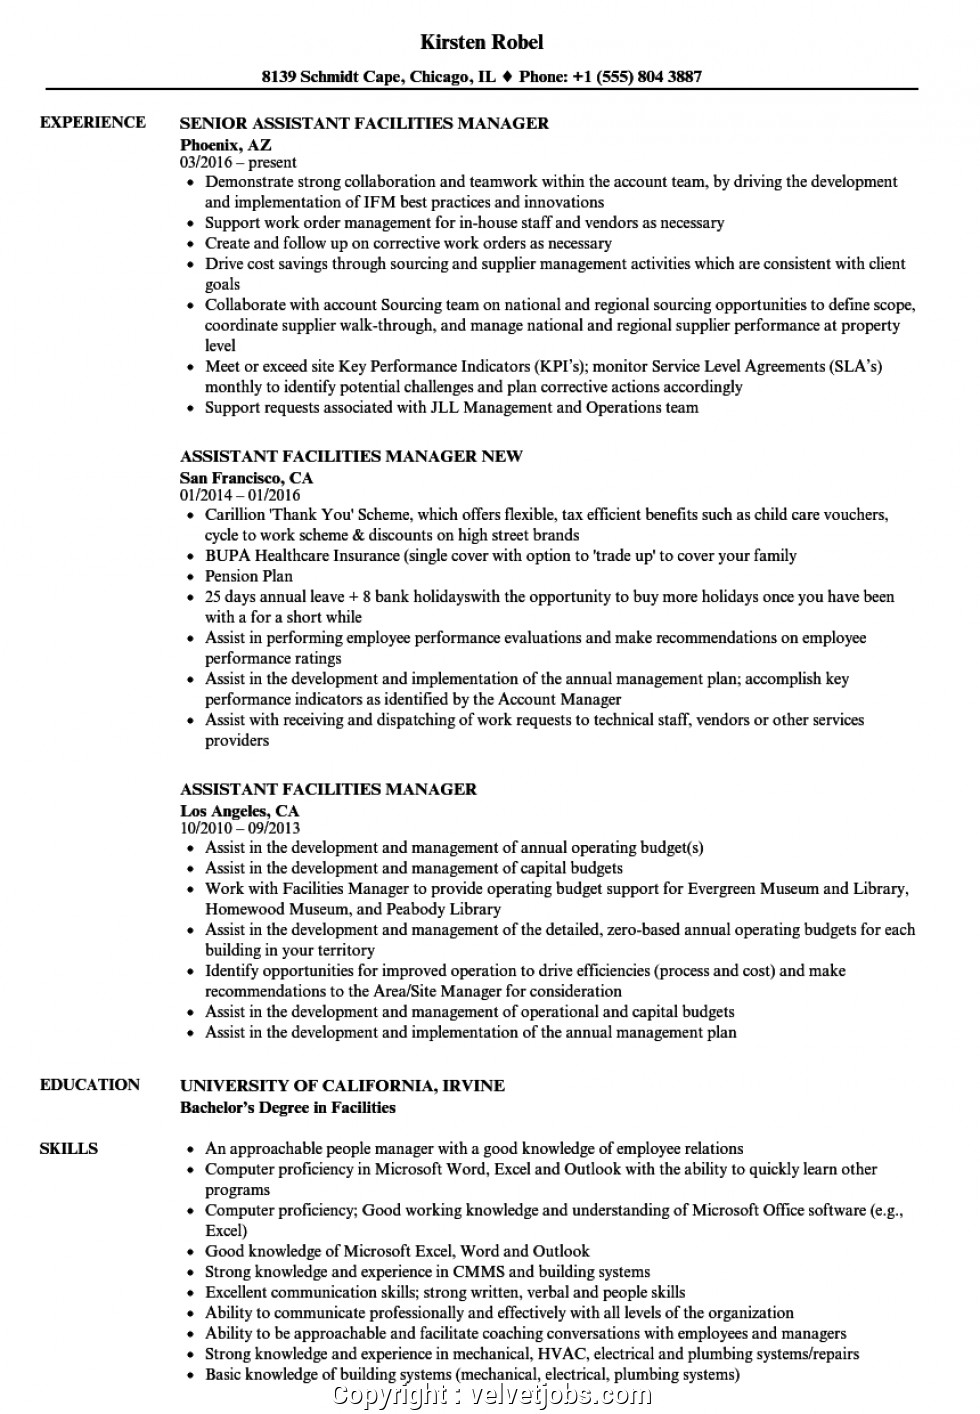 new facility manager resume sample